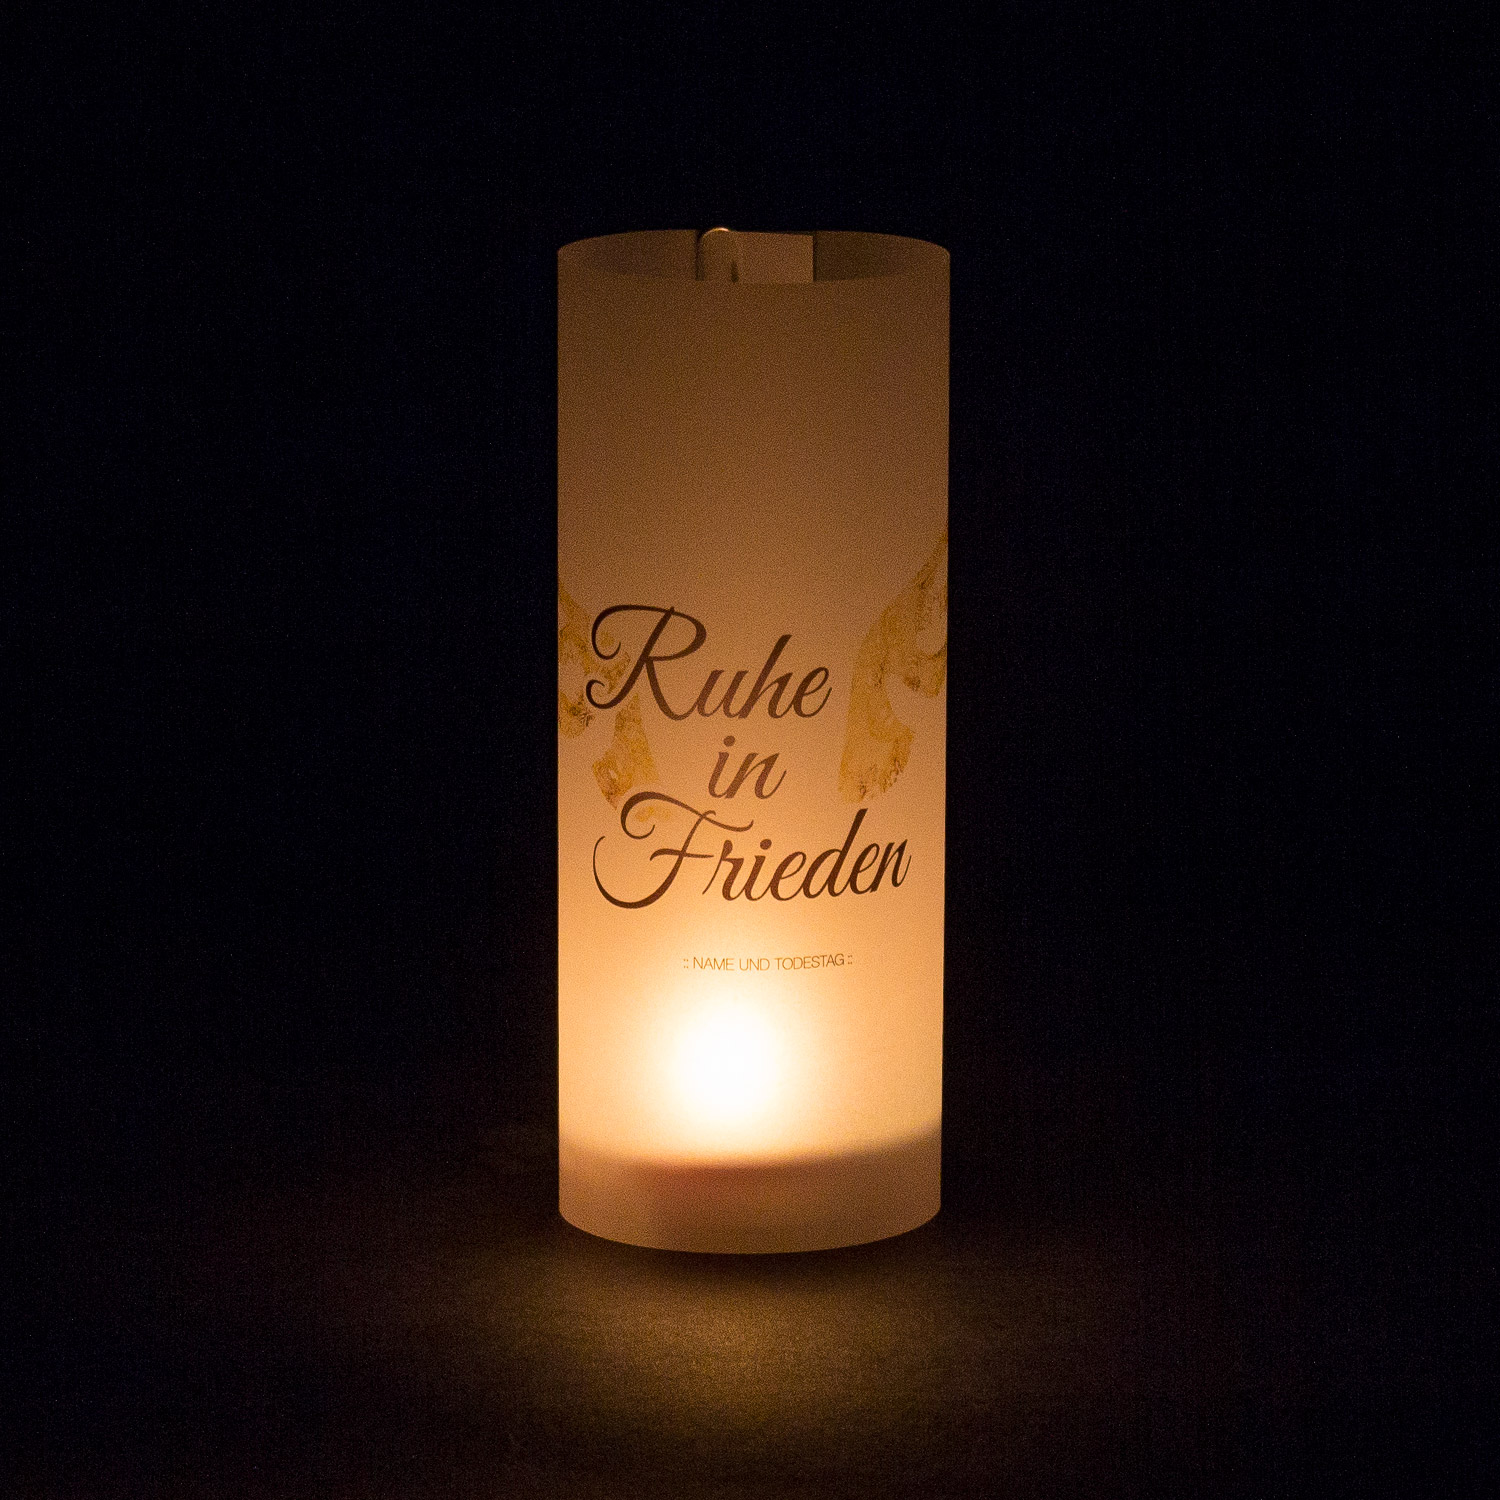 Paper Light Shade "Ruhe in Frieden" - The Special One